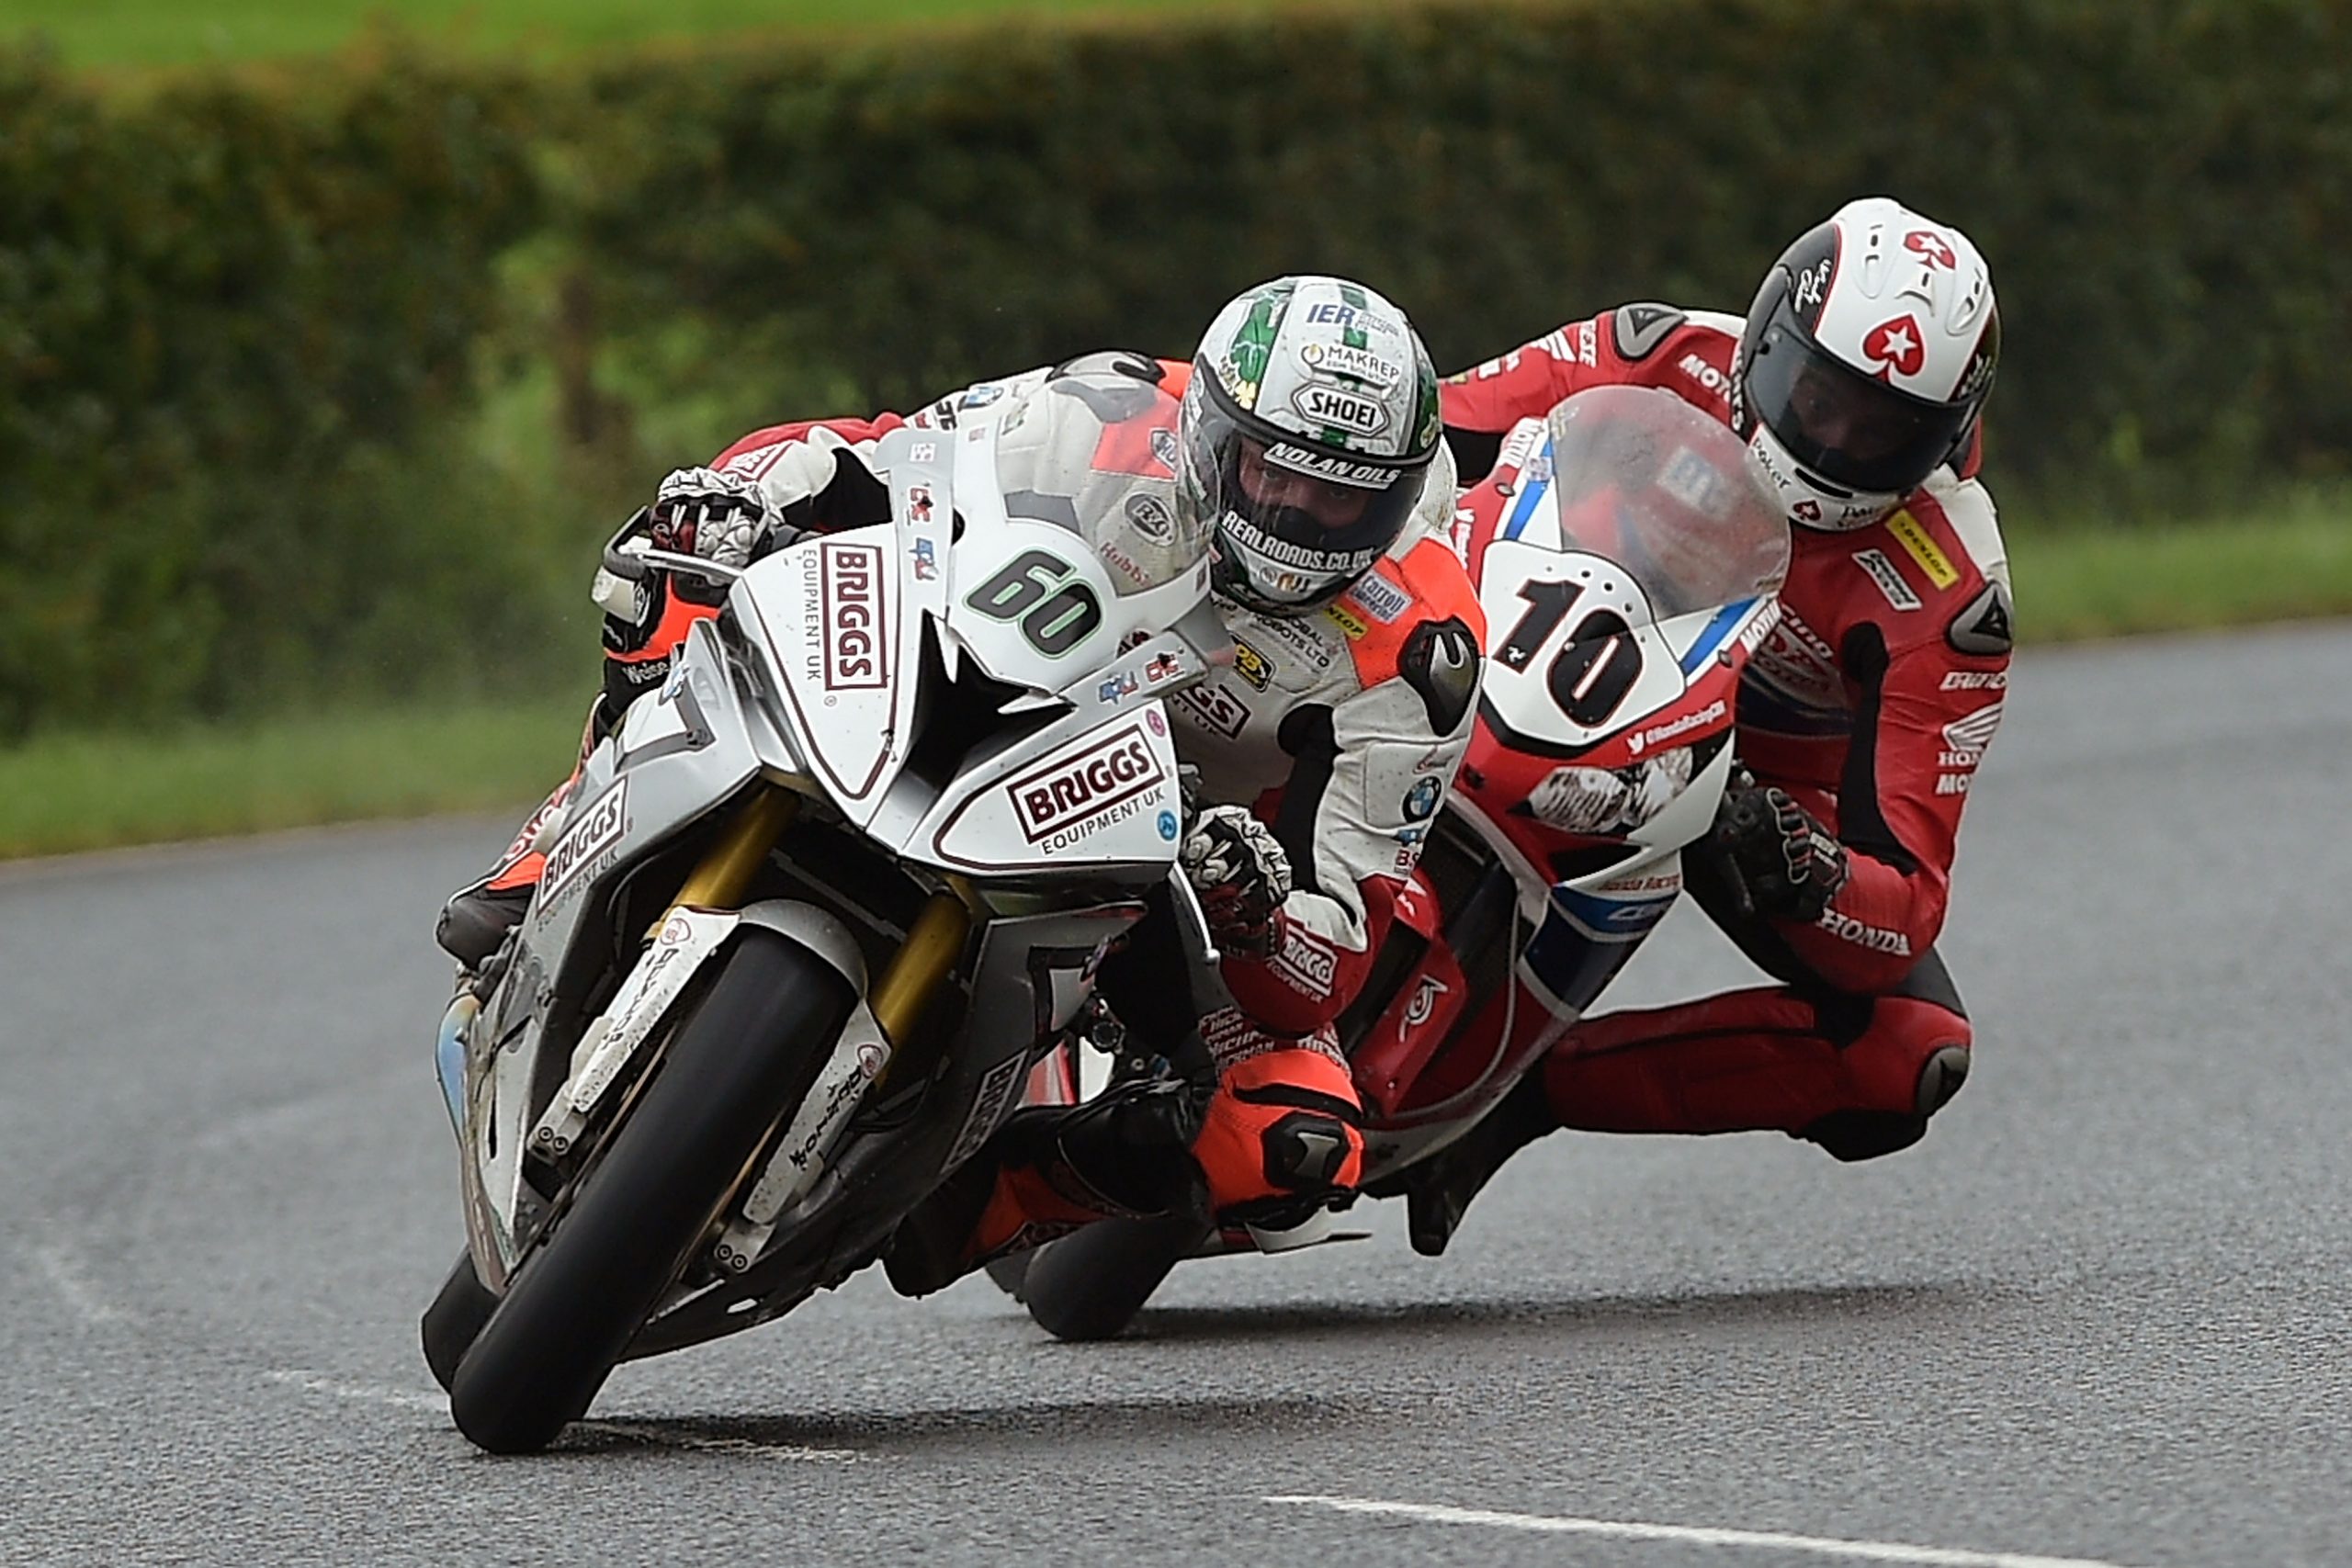 Peter-Hickman-leading-Conor-Cummins-in-the-second-Superbike-race-image-by-Jon-Jessop-Photography.jpg